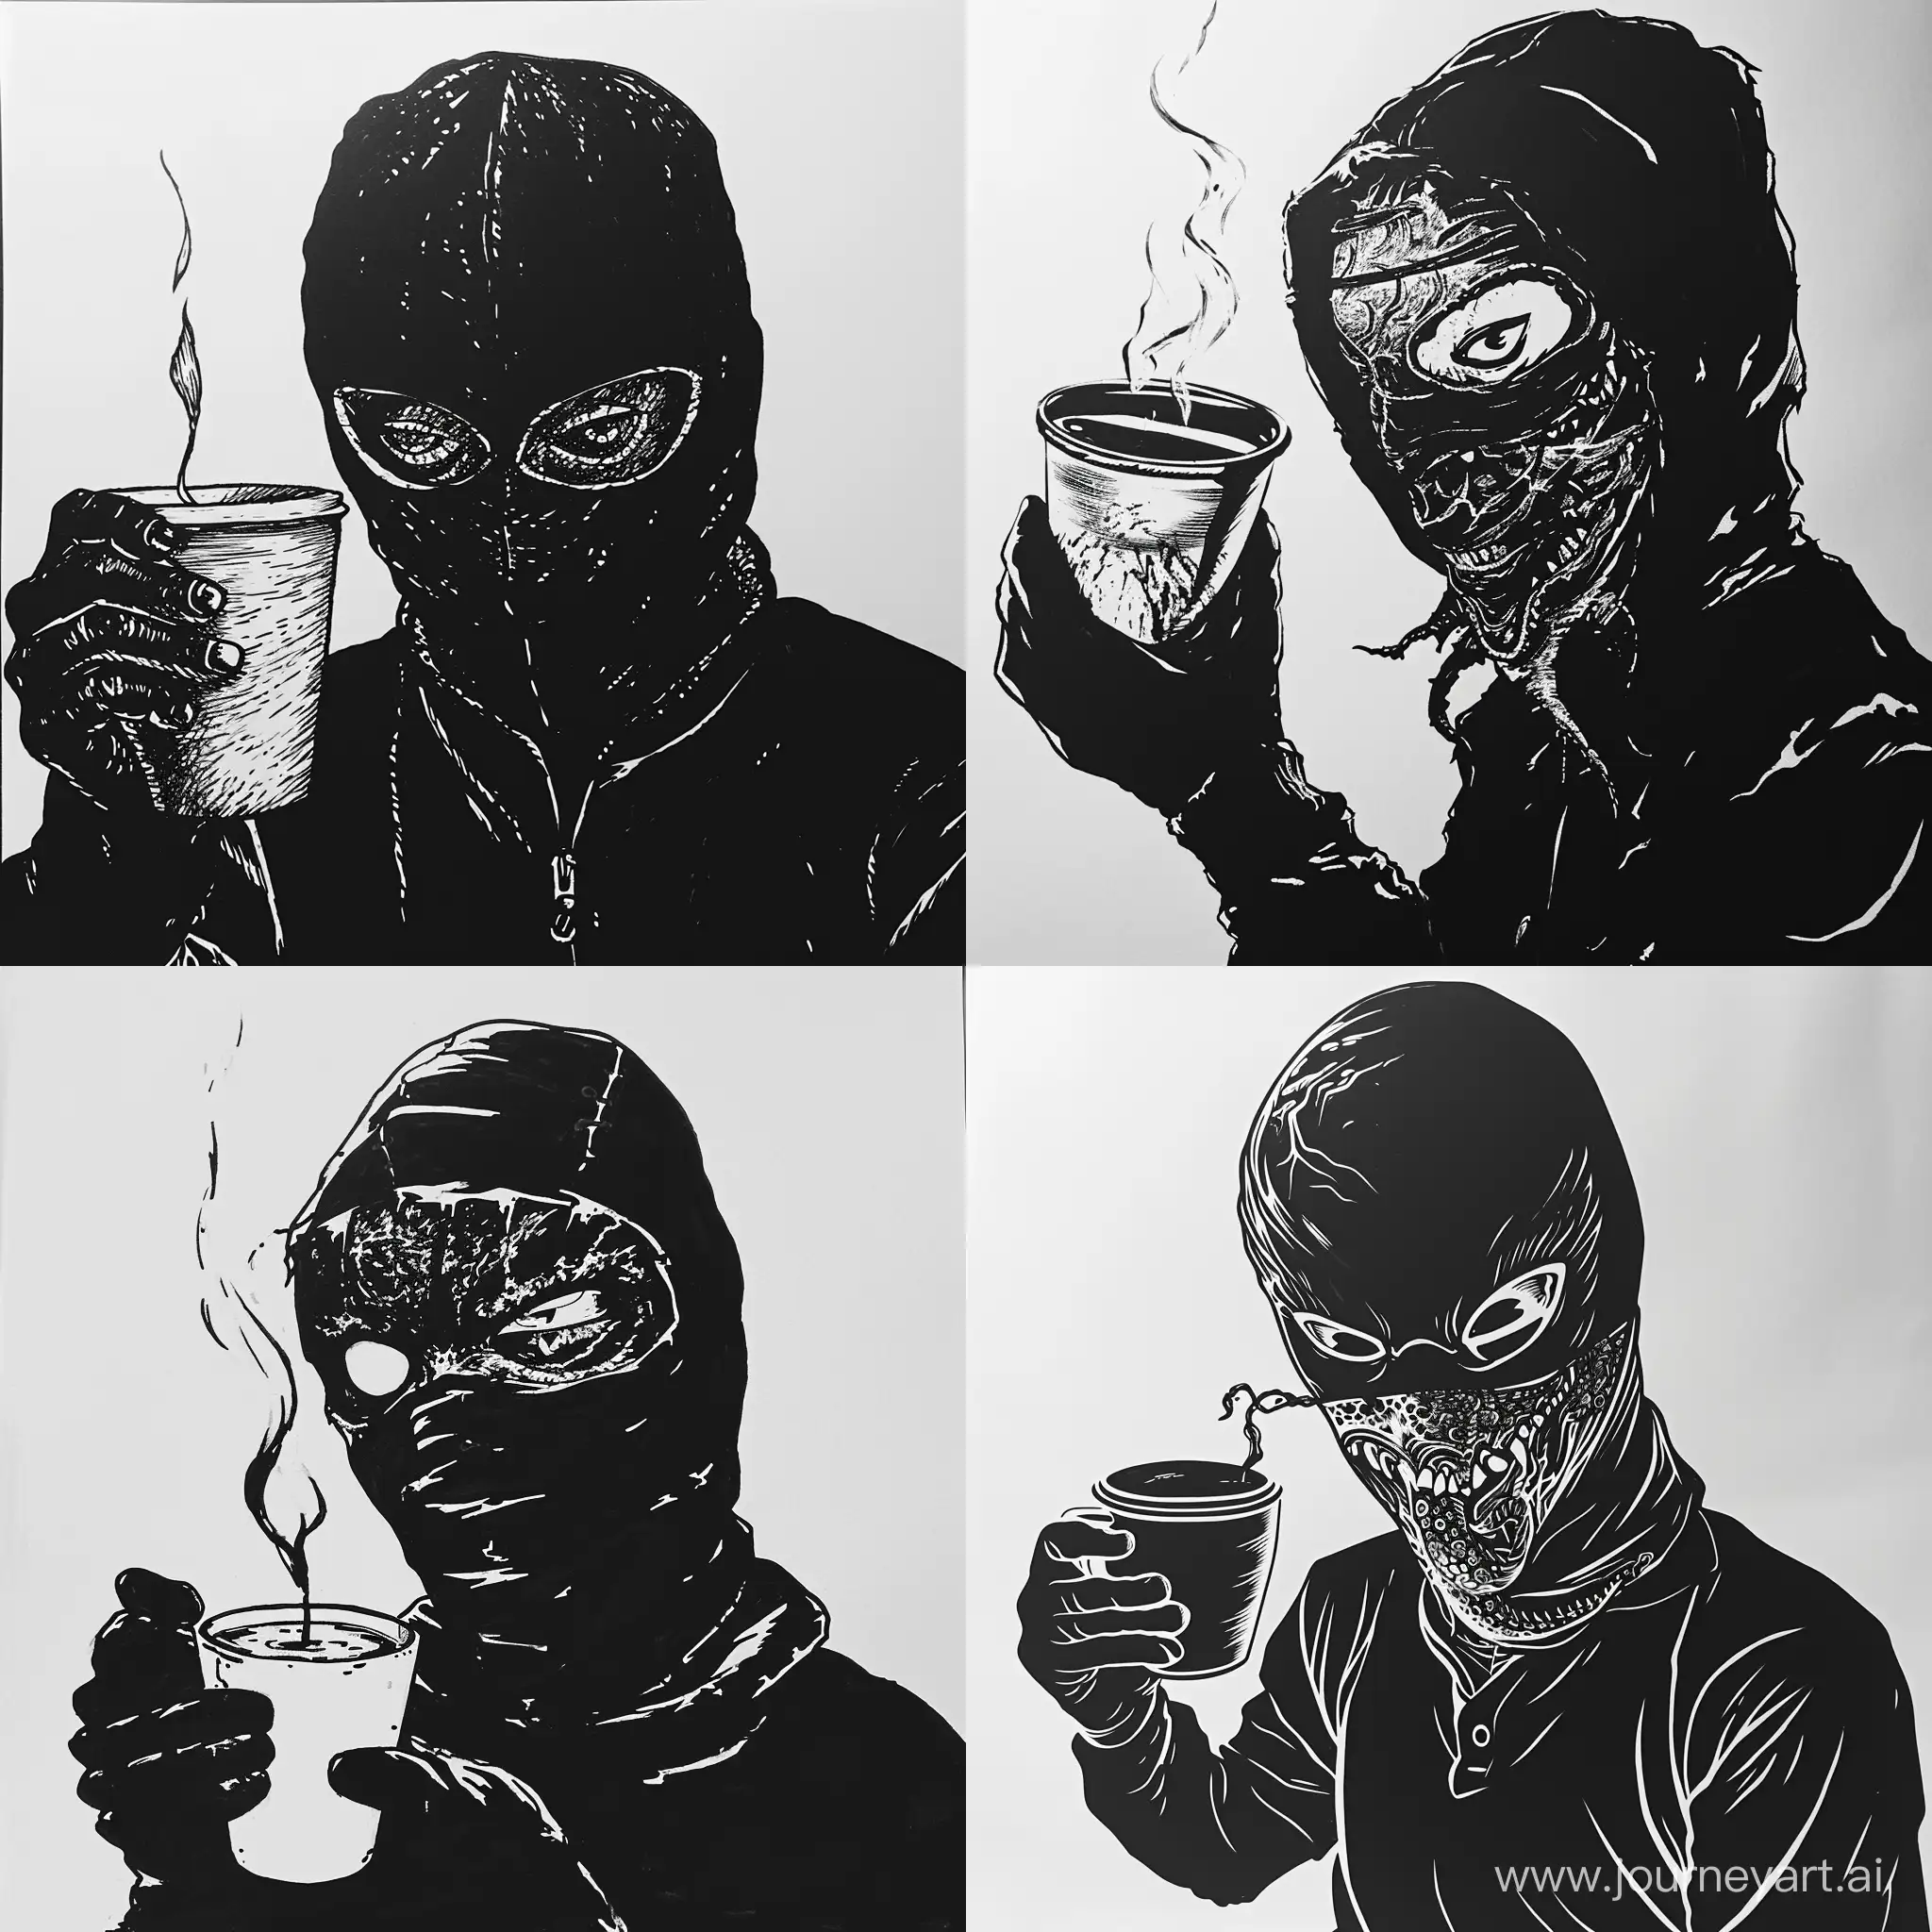 a black and white drawing of a person holding a cup of coffee, mf doom, balaclava, ski mask, by Bascove, grime, mf doom mask, mf doom reptile eyes, mf doom with reptile eyes, portrait of mf doom, thug life, wearing bandit mask, ski masks, london gang member, twisted god with no face, black stencil